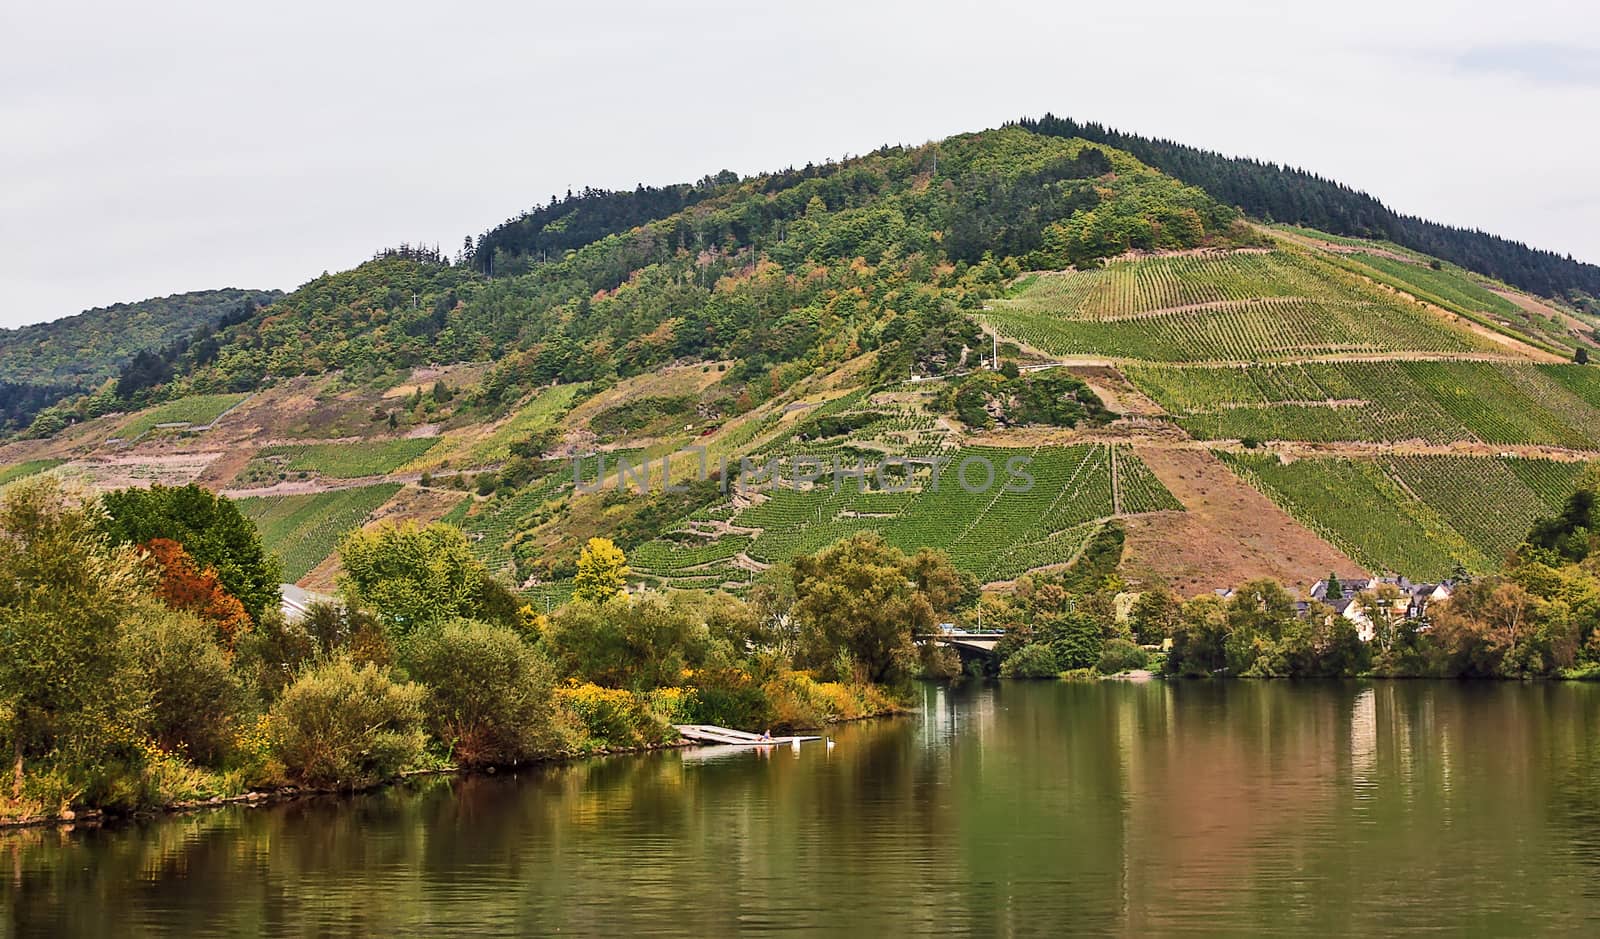 The vineyards along the river Moselle,Germany by borisb17